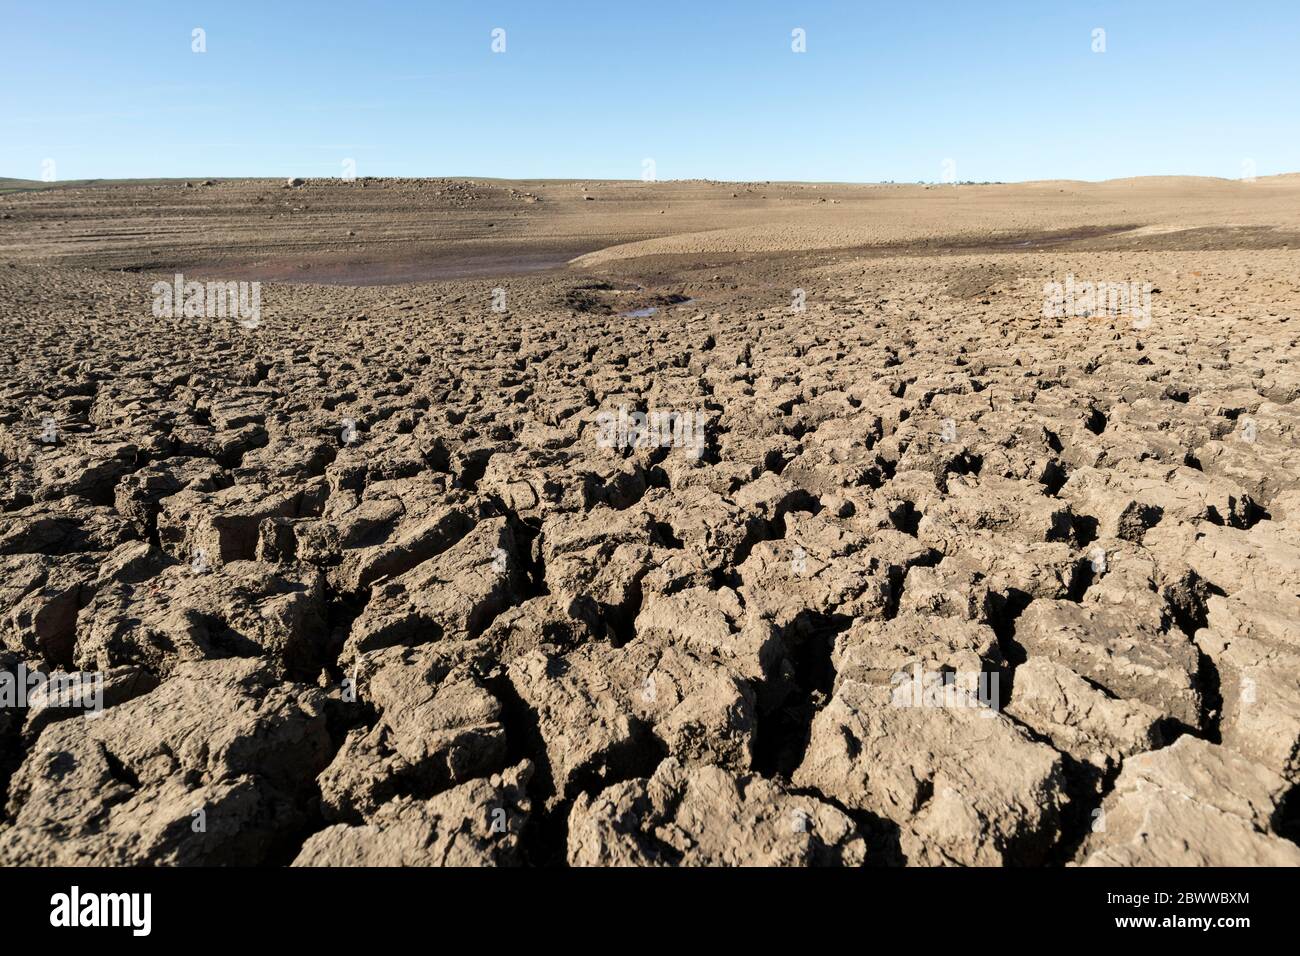 Low Water Levels at Selset Reservoir after the driest May on record, coupled with repair work downstream left the Ground Parched and Cracked, Lunedale Stock Photo